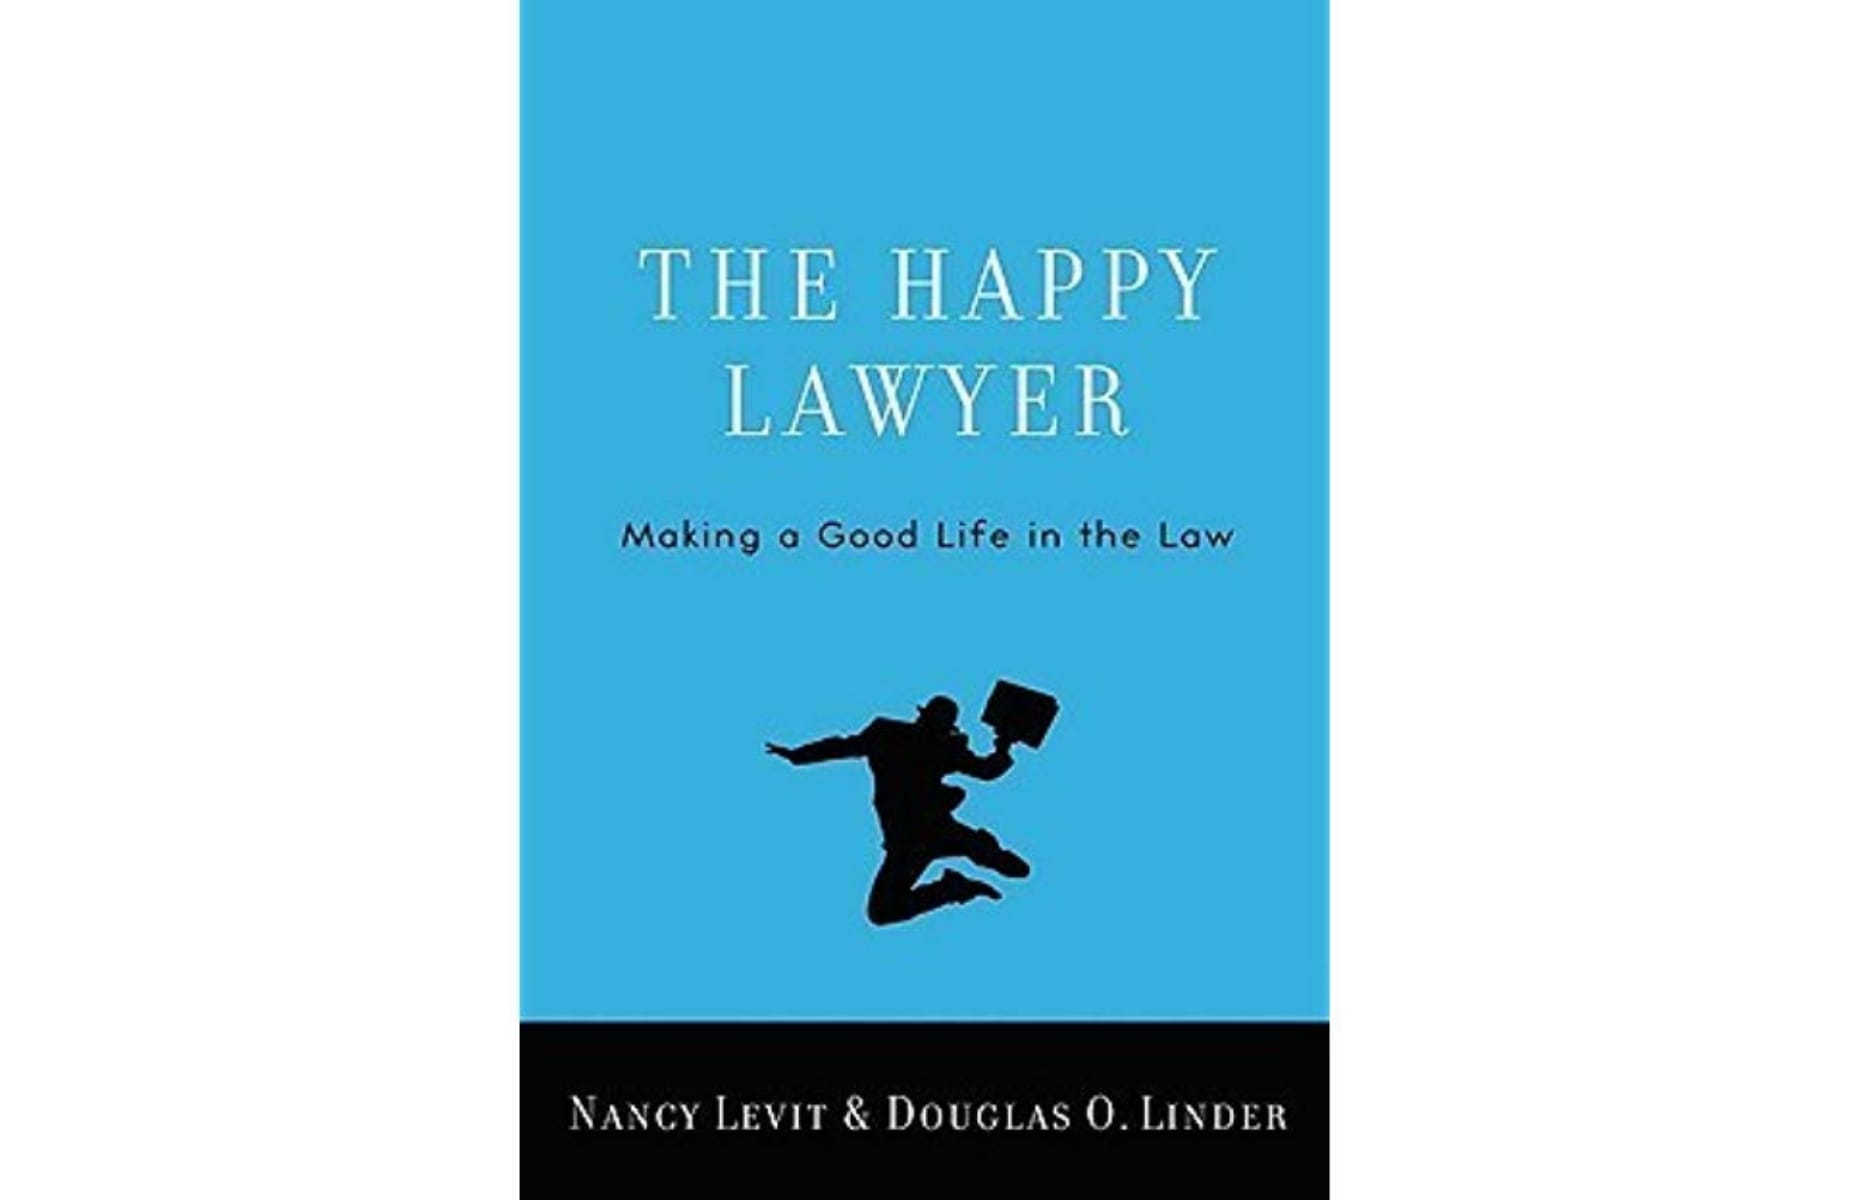 The Happy Lawyer: Making a Good Life in the Law